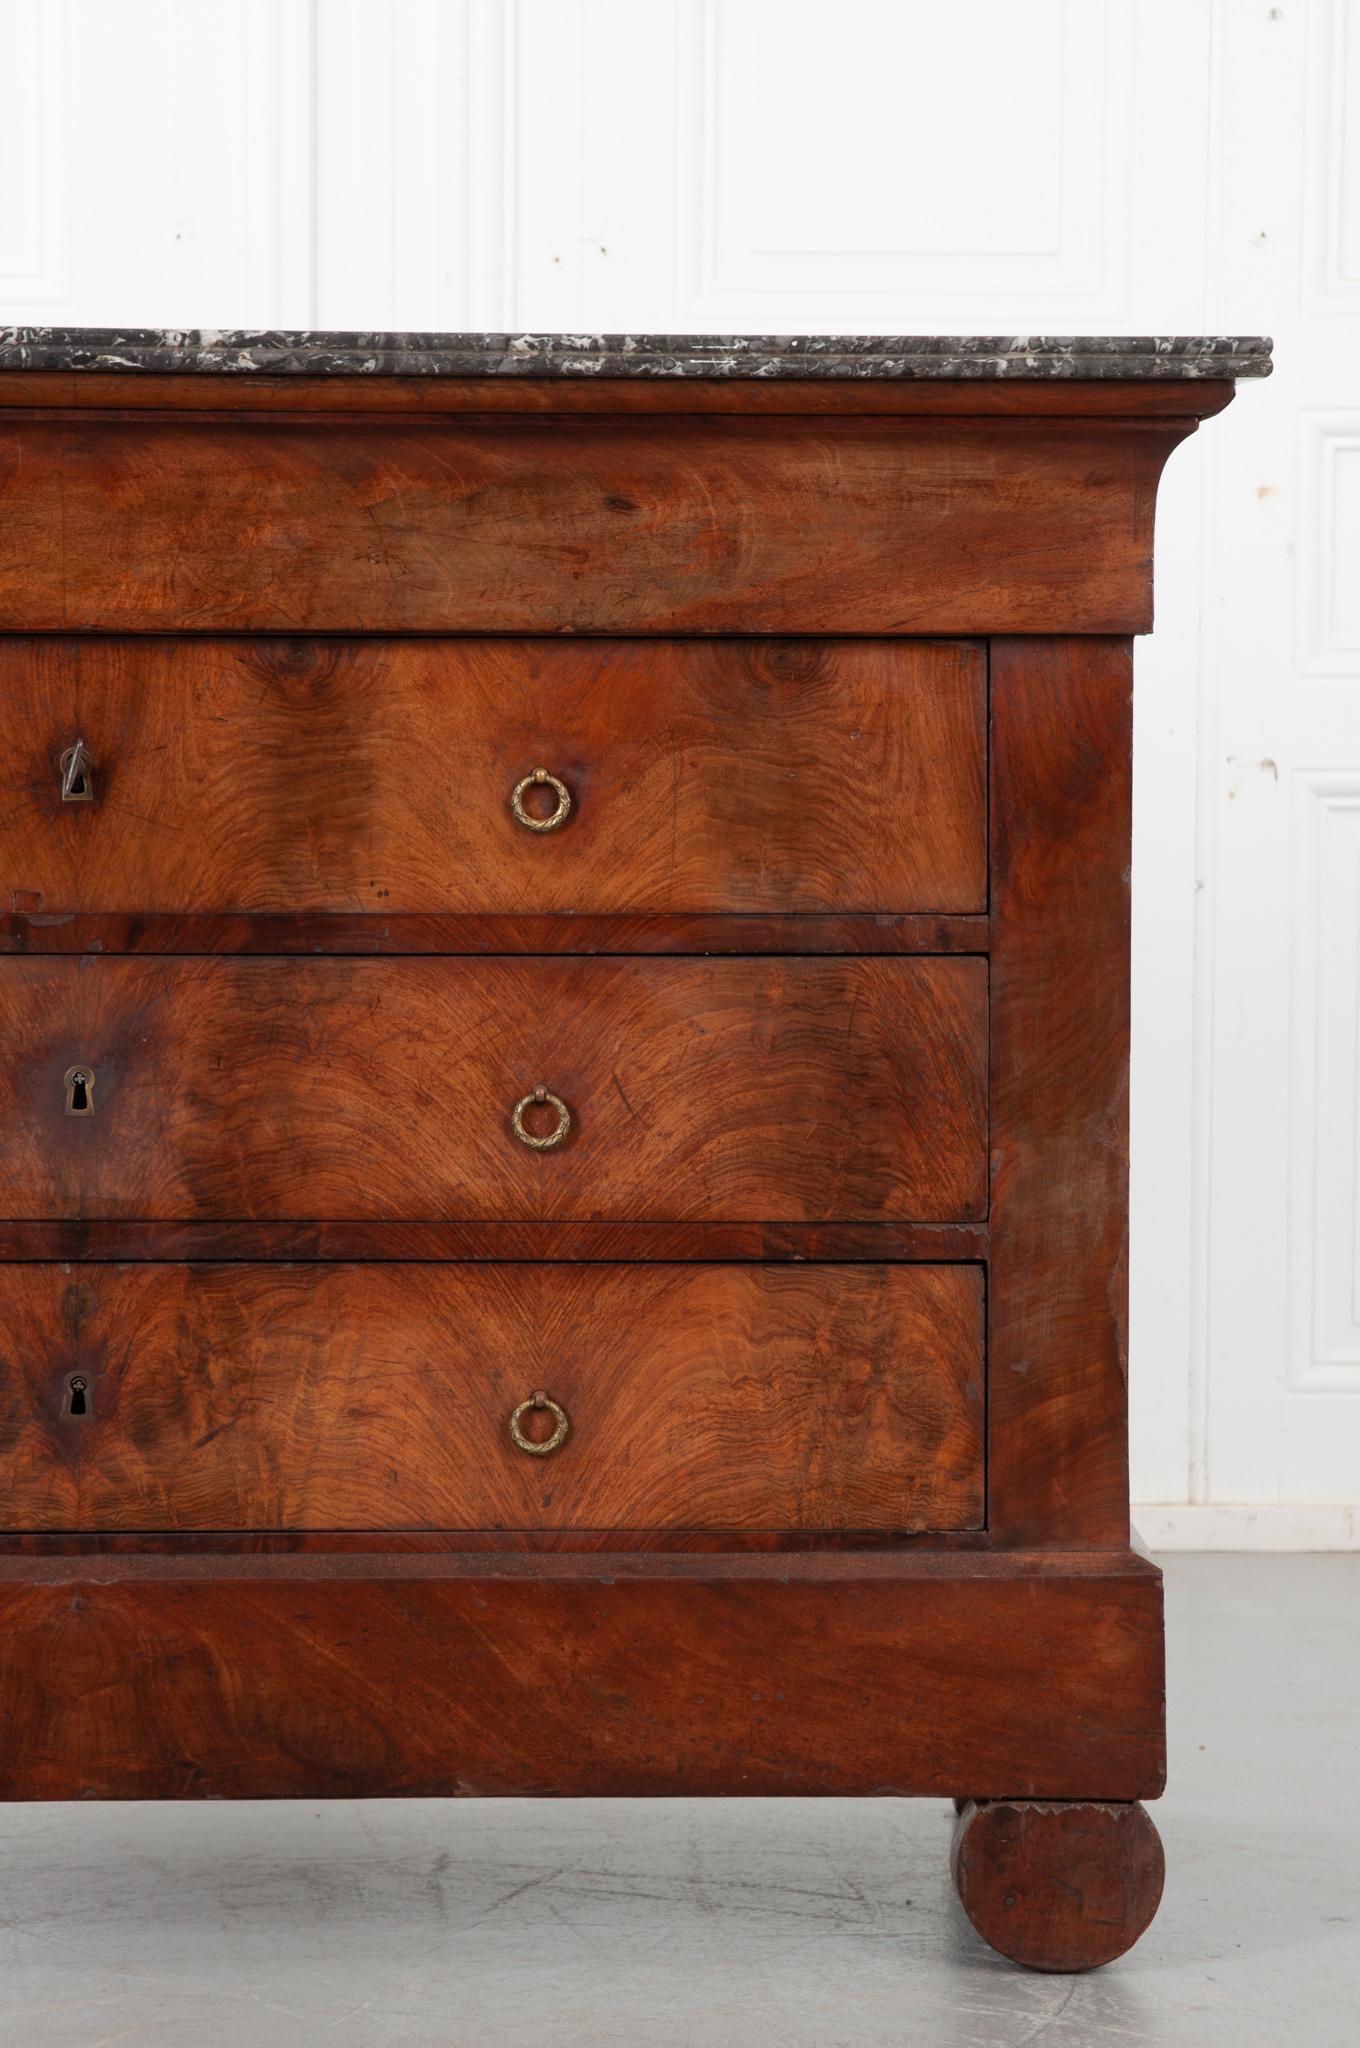 French Empire 19th Century Mahogany Commode In Good Condition For Sale In Baton Rouge, LA